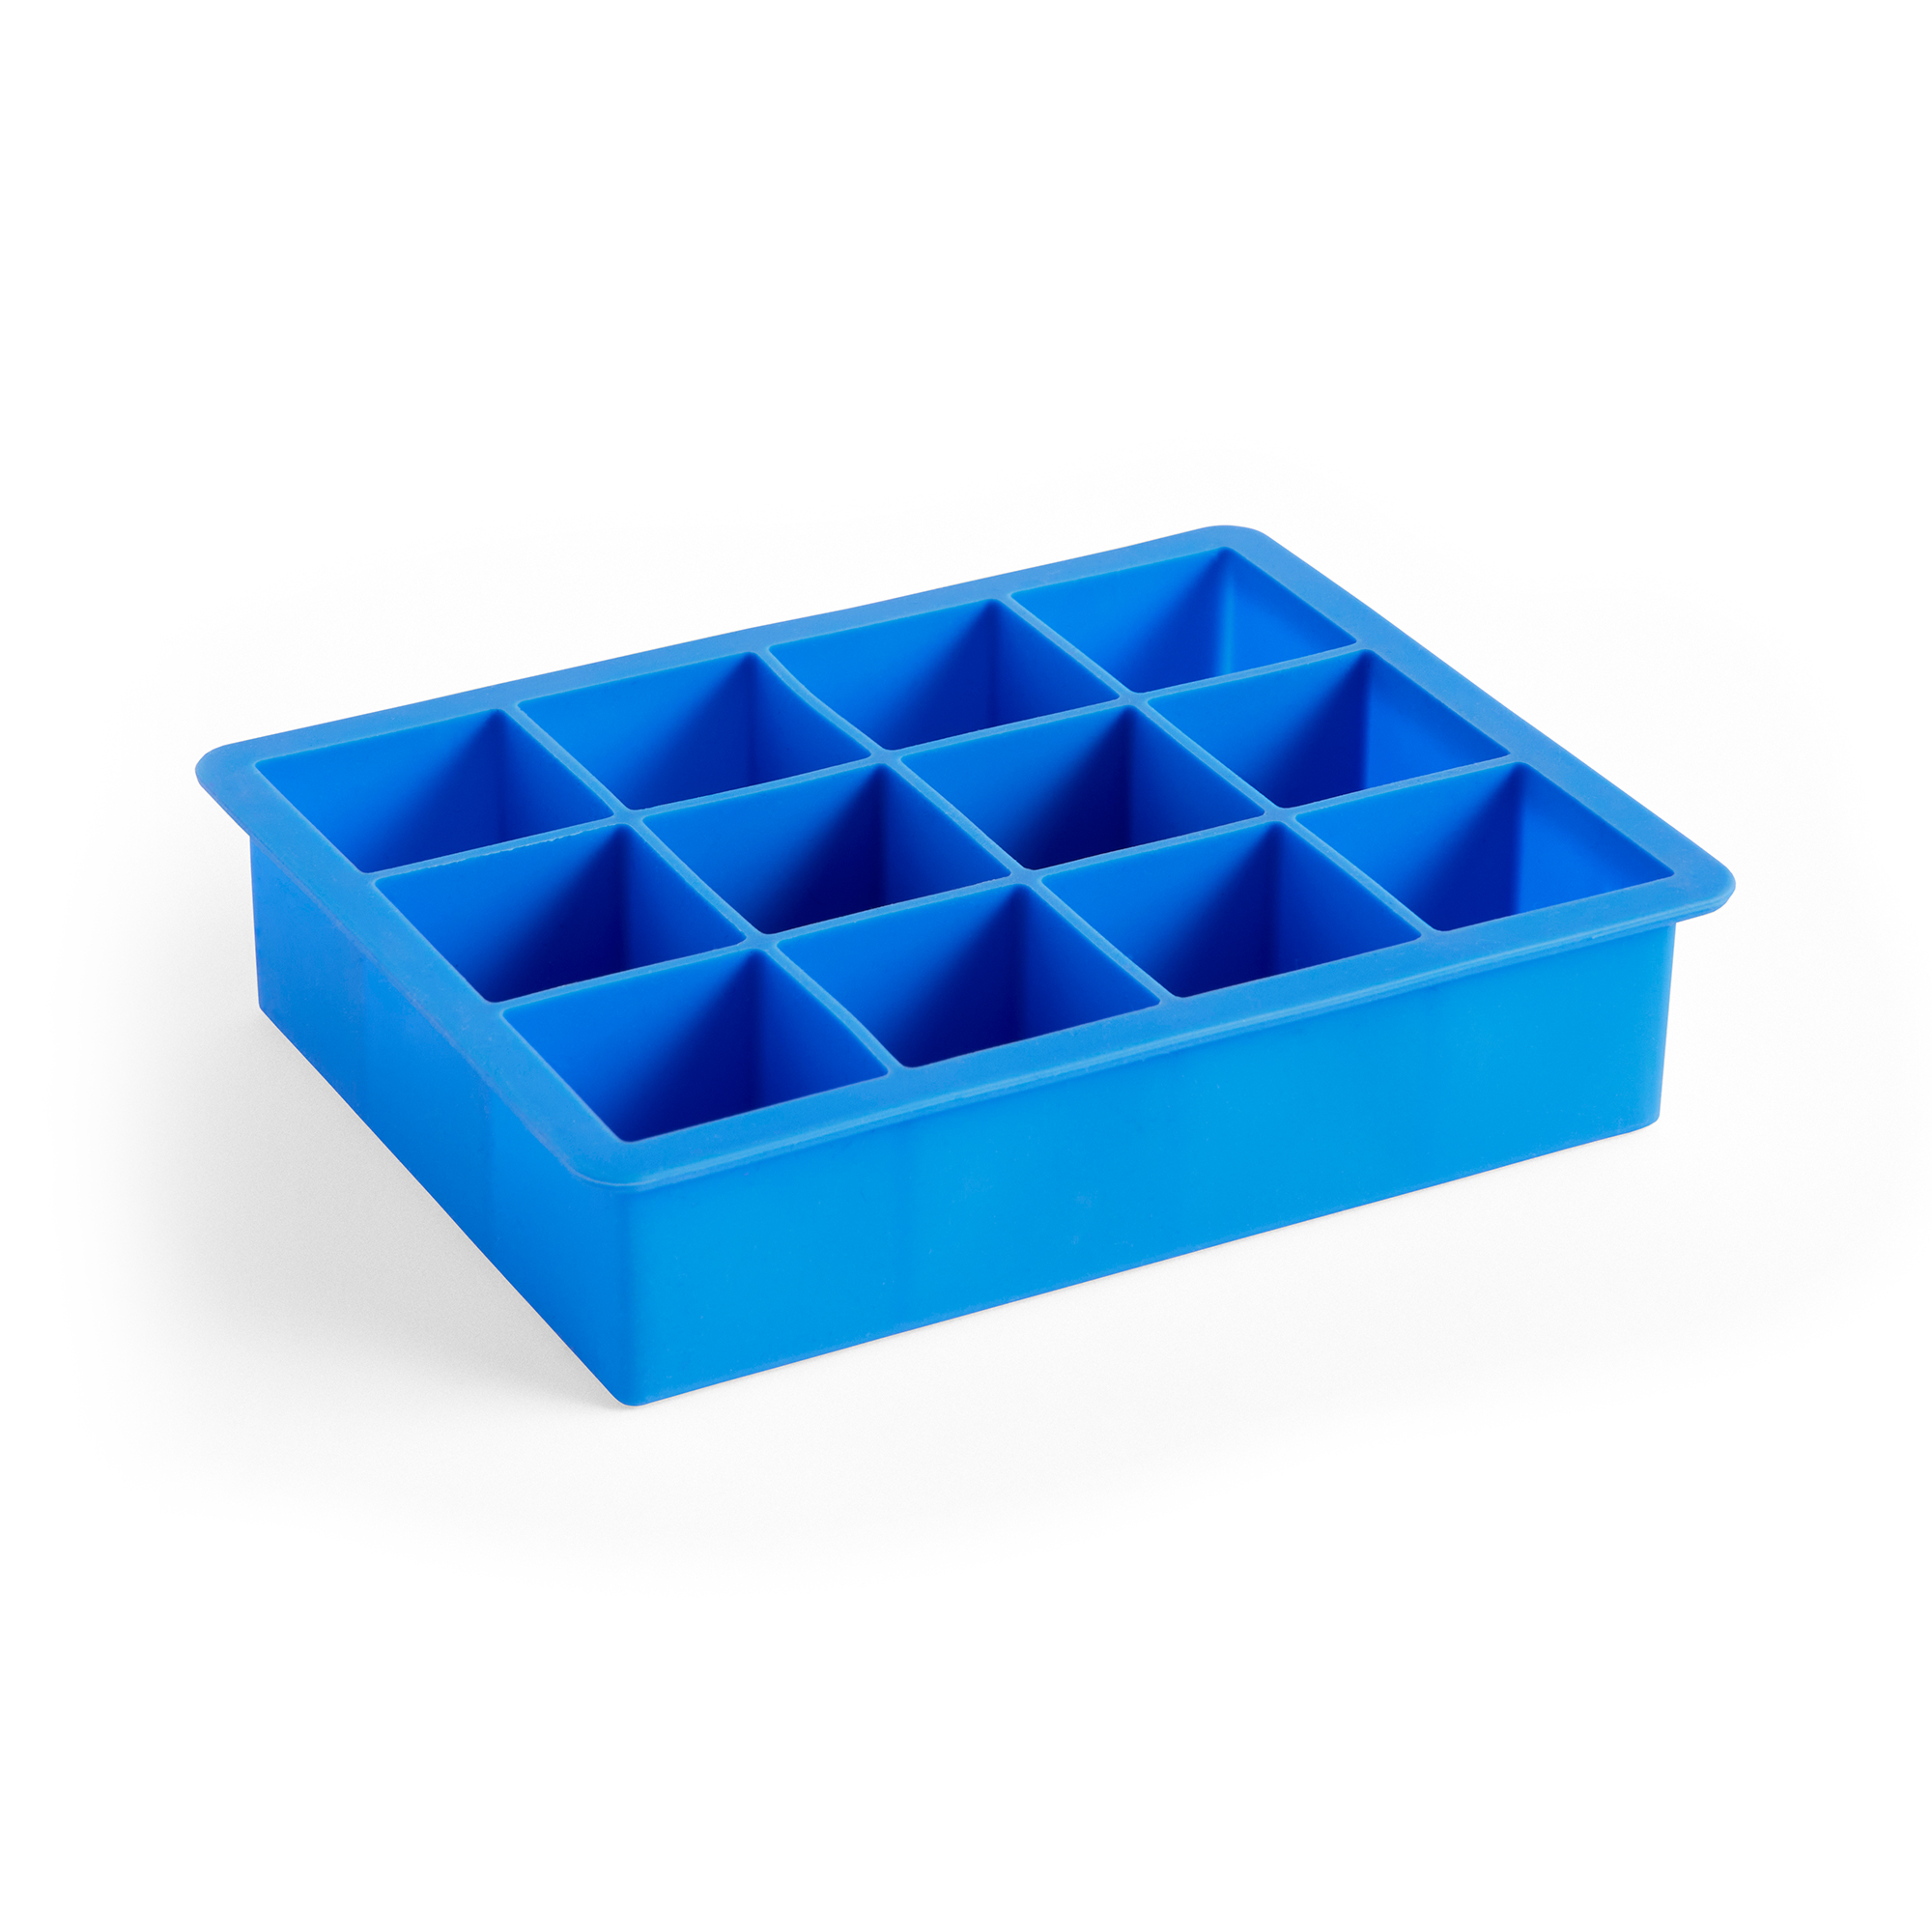 Choice Black Silicone 8 Compartment 2 Cube Ice Mold